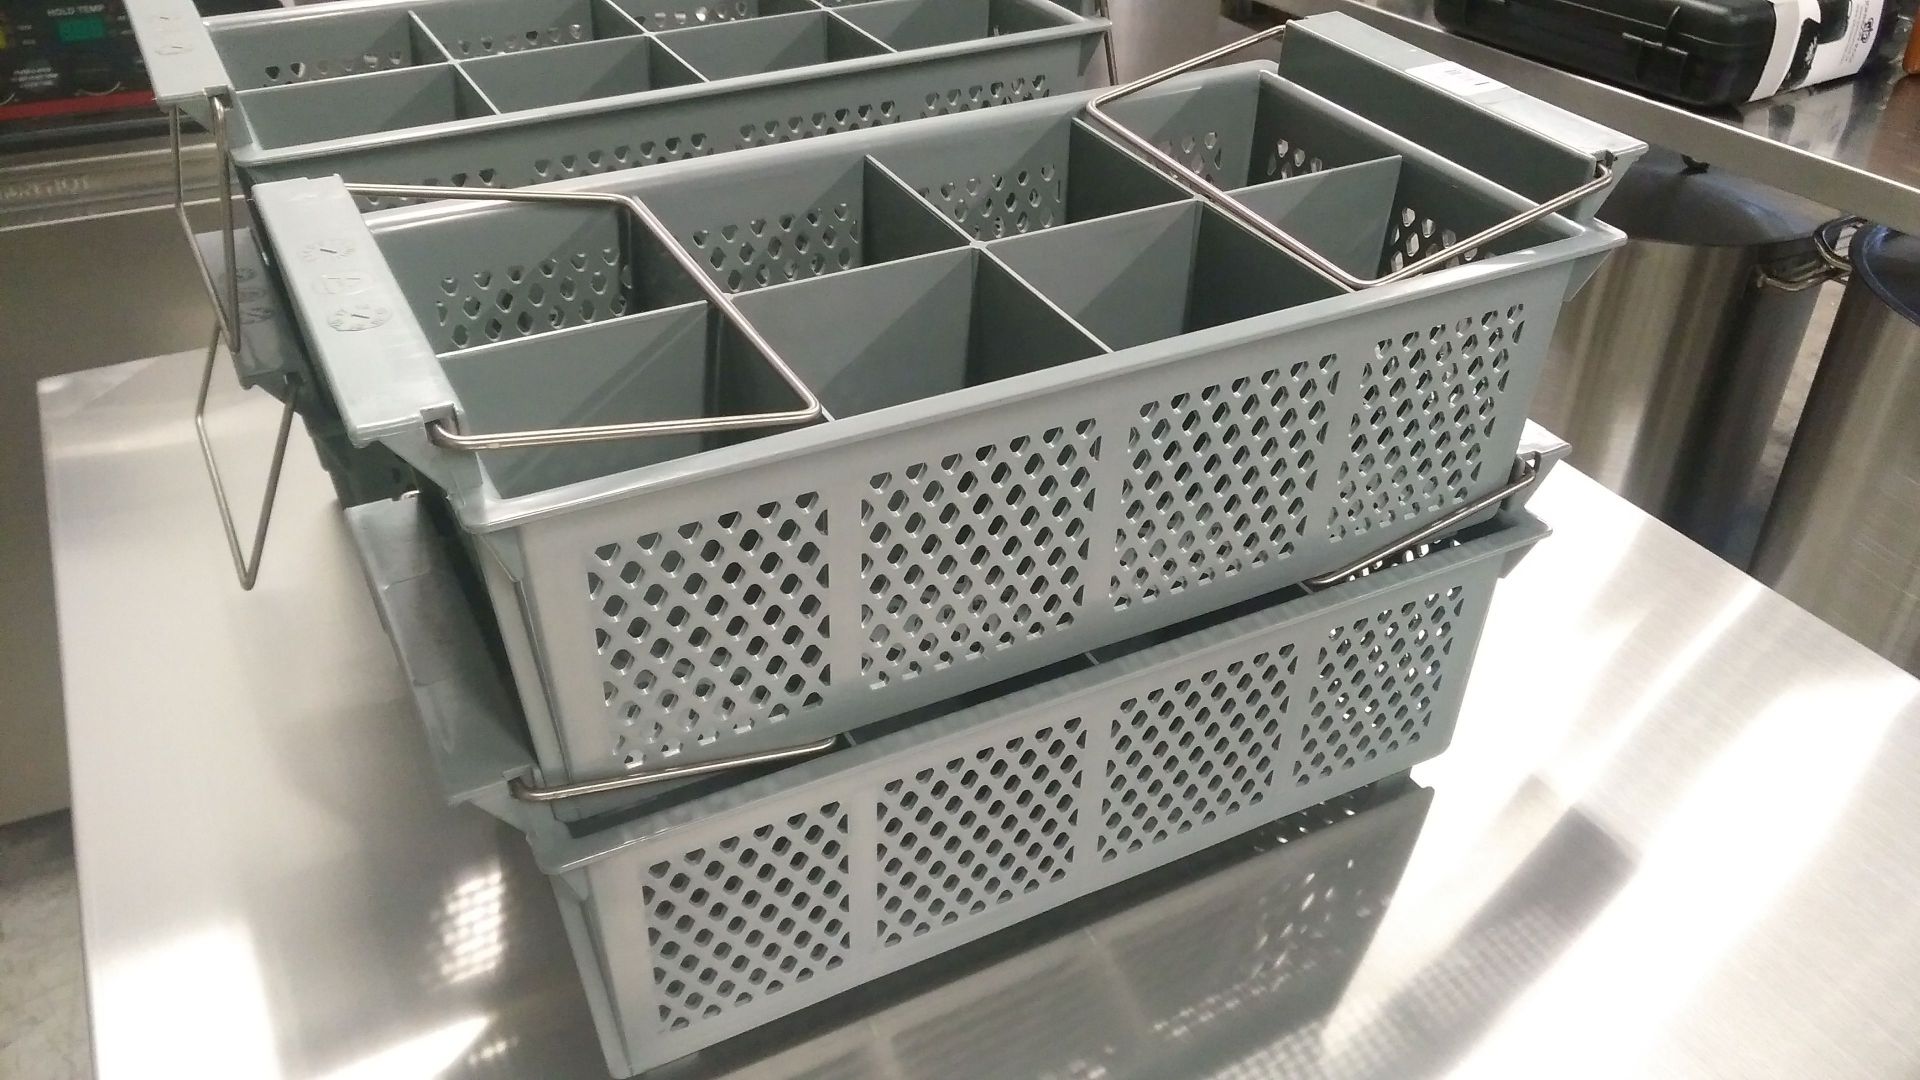 8 Compartment Cutlery Basket with Handles - Lot of 2